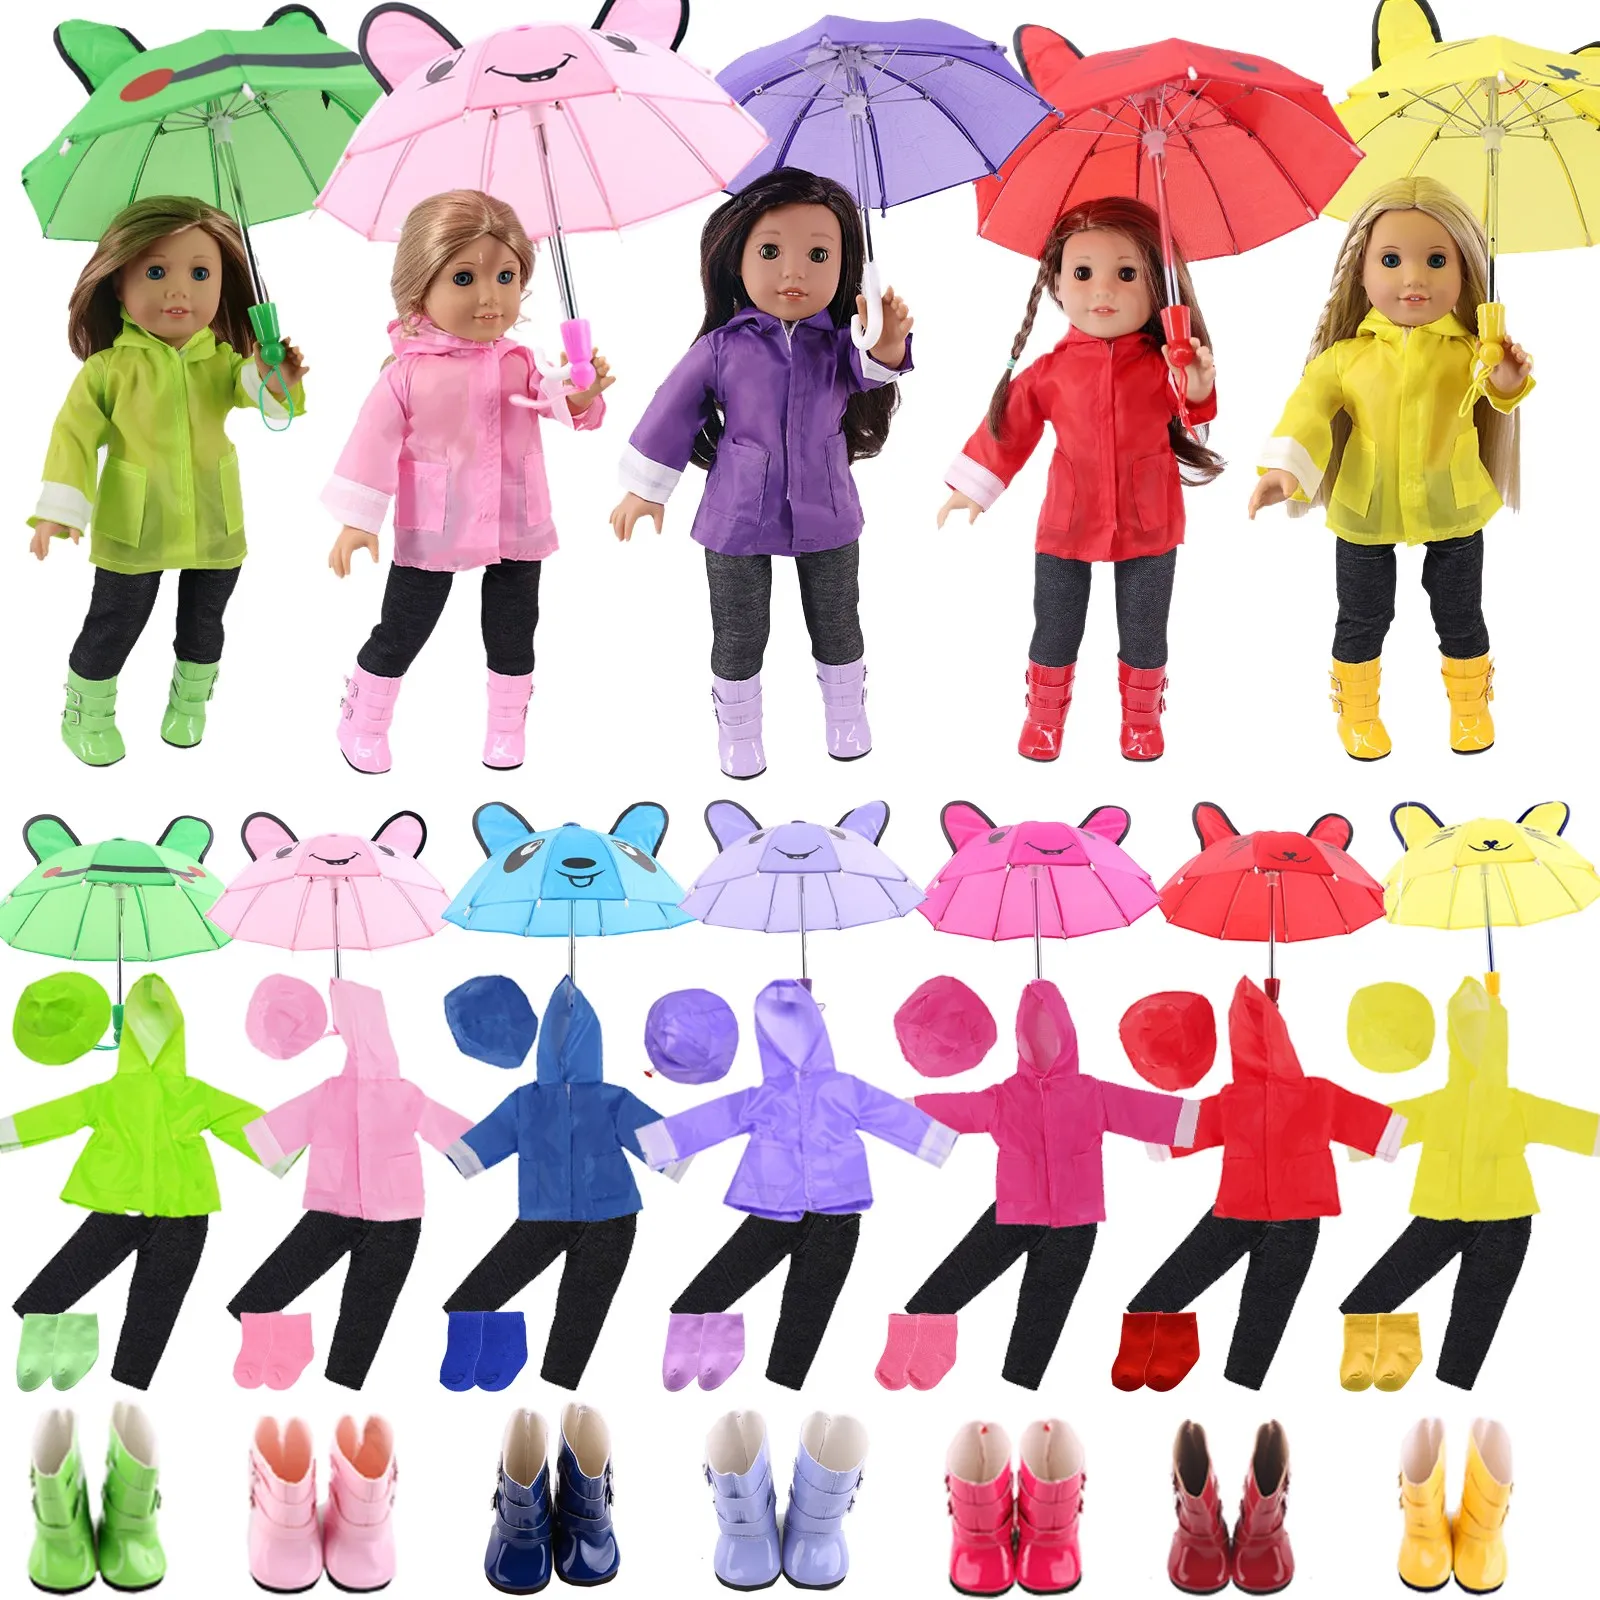 4-Piece Doll Rain Clothes Shoes Accessories Raincoat Rainboots Umbrella Fit 18inch Girl Doll43cmReborn Baby Our Generation Gift european tropical rain forest ceramic bathroom five piece set of sanitary ware five piece set of bathroom and toilet toiletries